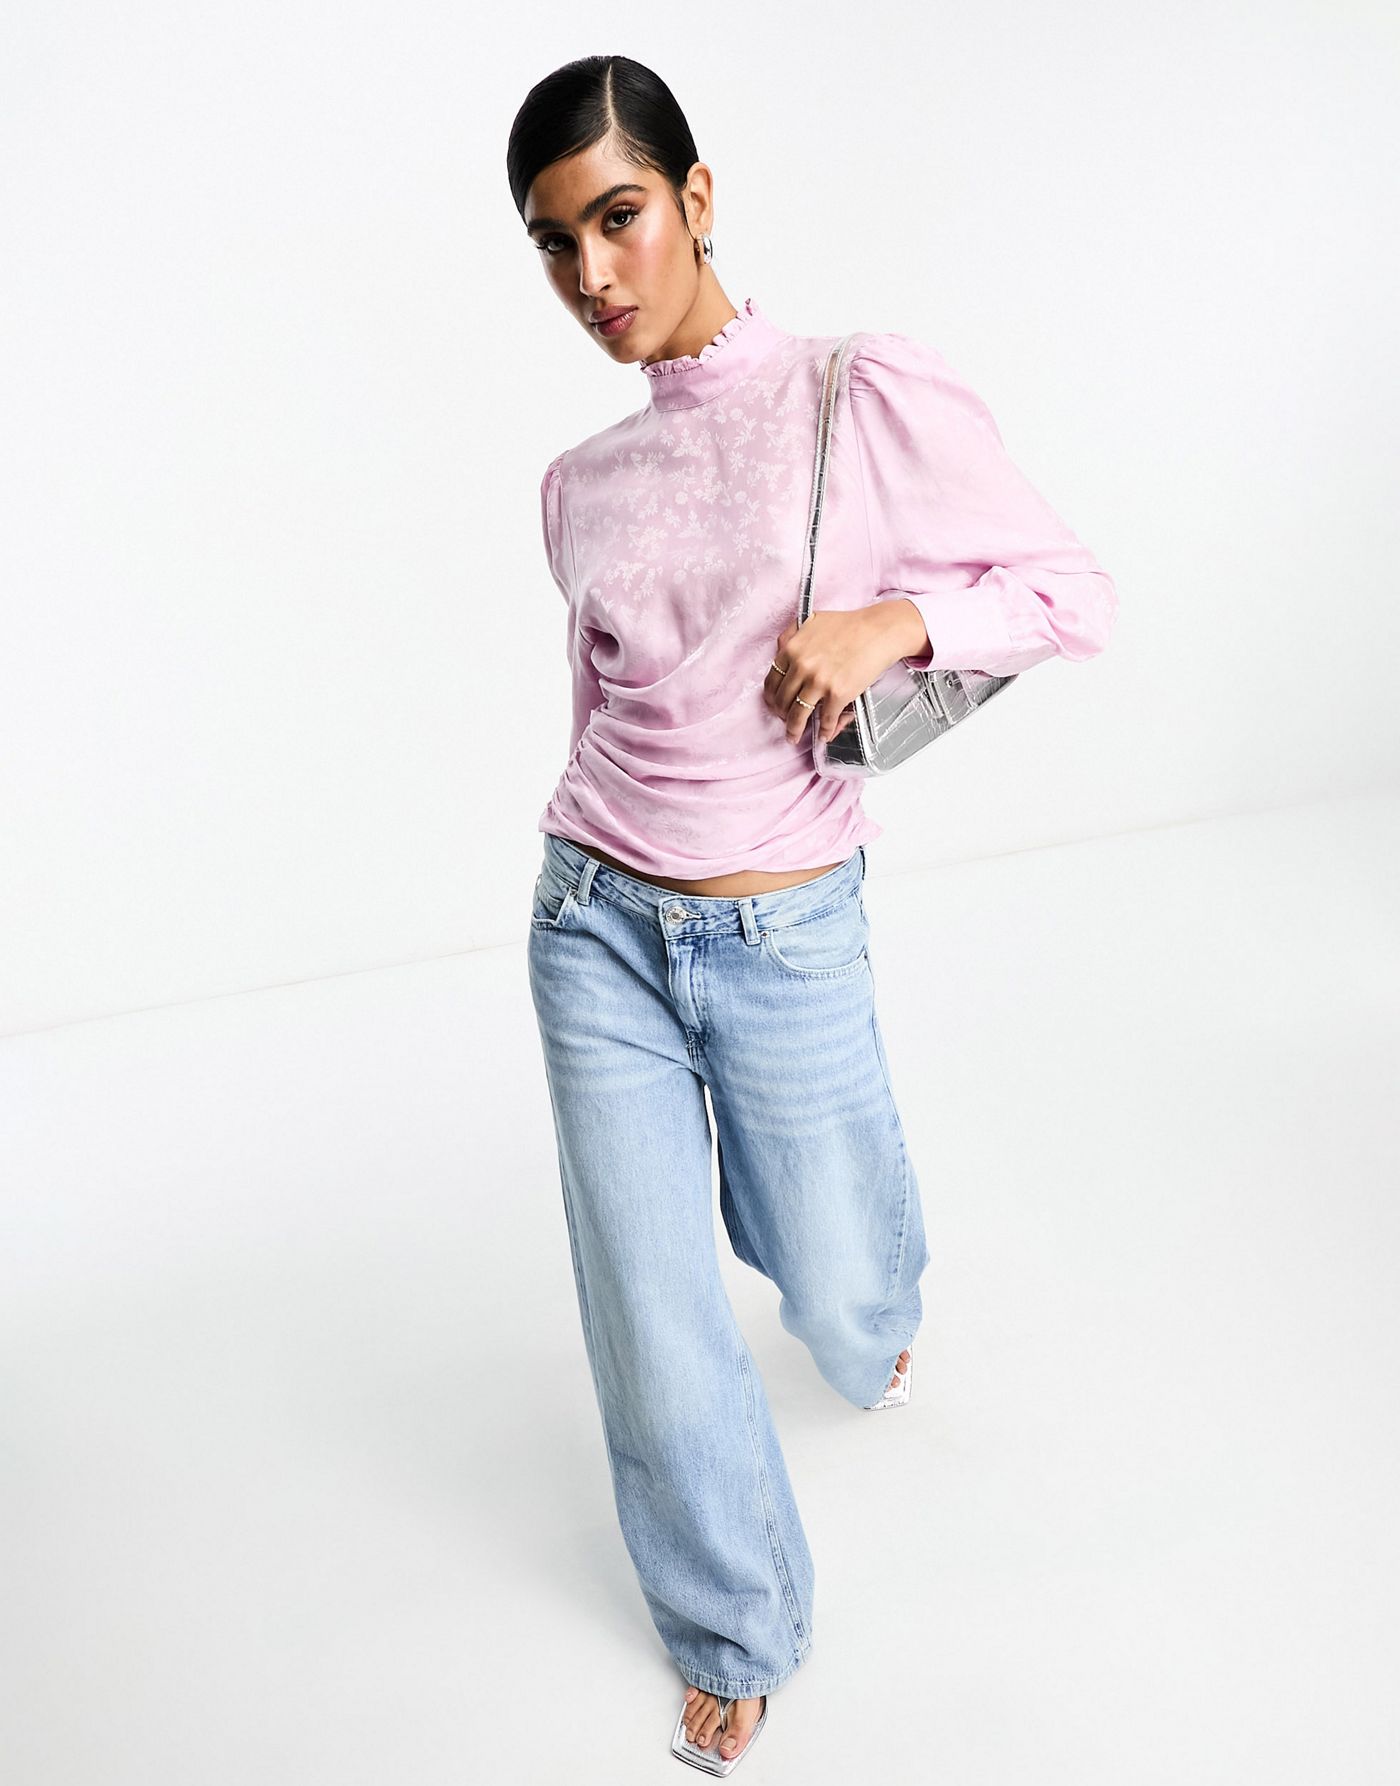 & Other Stories jacquard blouse with volume sleeves and drape detail in lilac